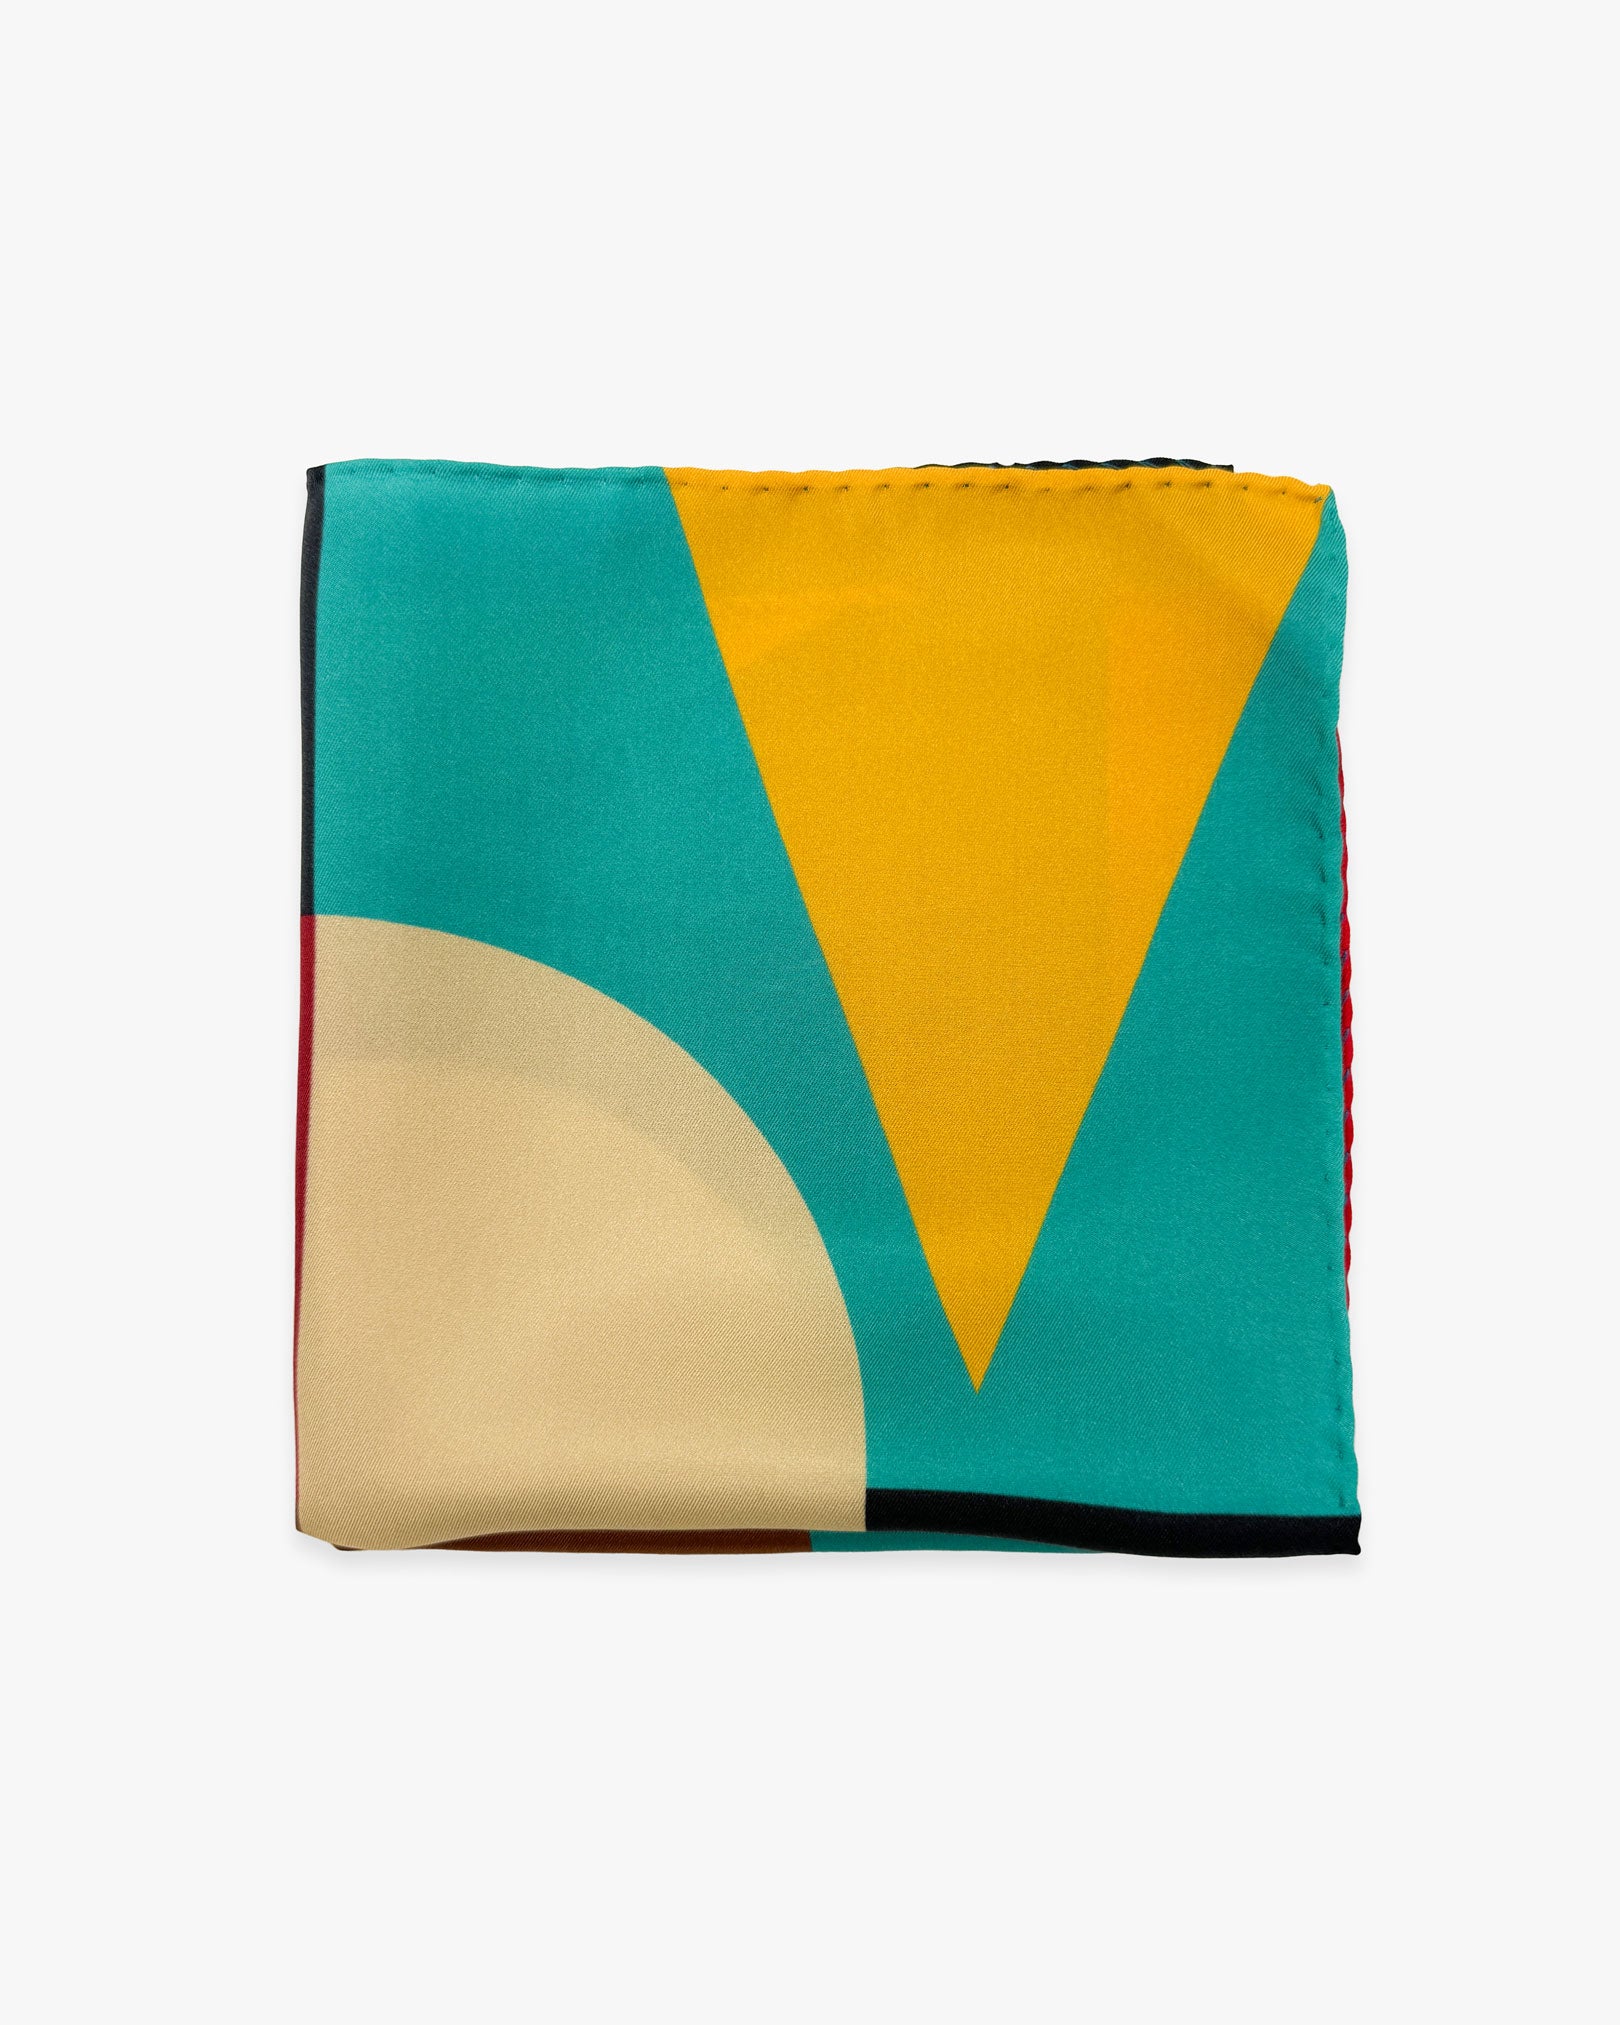 The 'Berlin' silk pocket square from SOHO Scarves folded into a quarter, showing a portion of the geometric and bauhaus-inspired pattern.